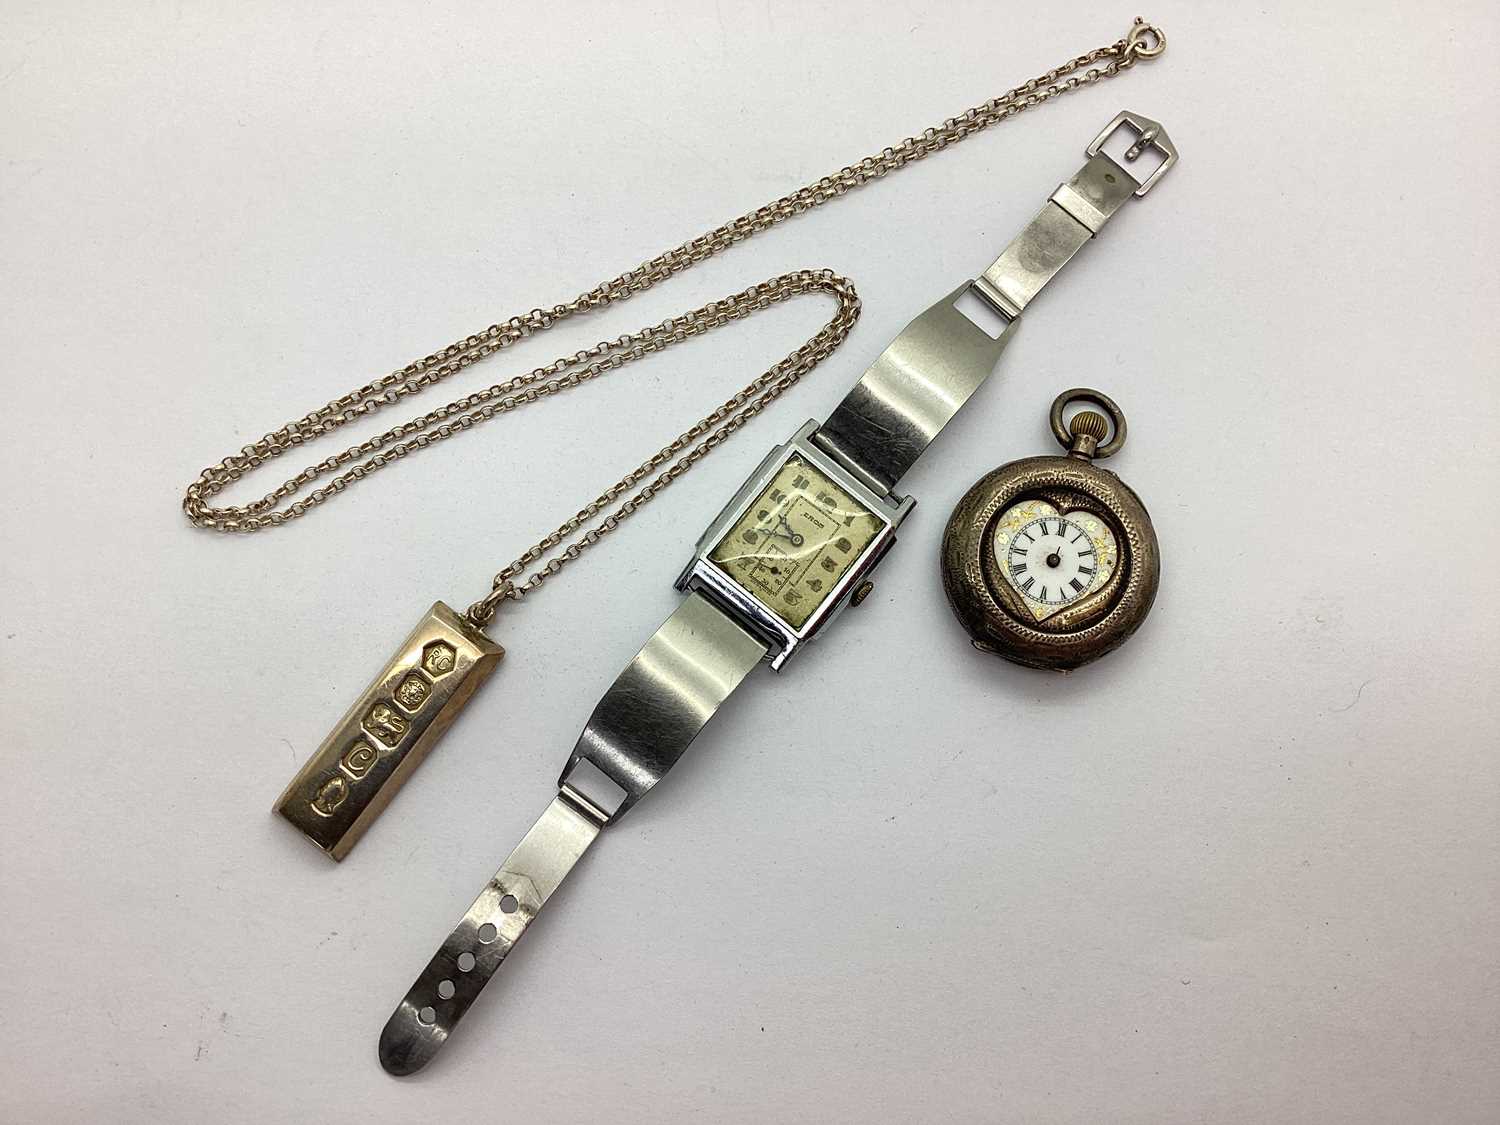 A Decorative Fob Watch, with heart shape dial (lacking glass and hands), within allover engraved